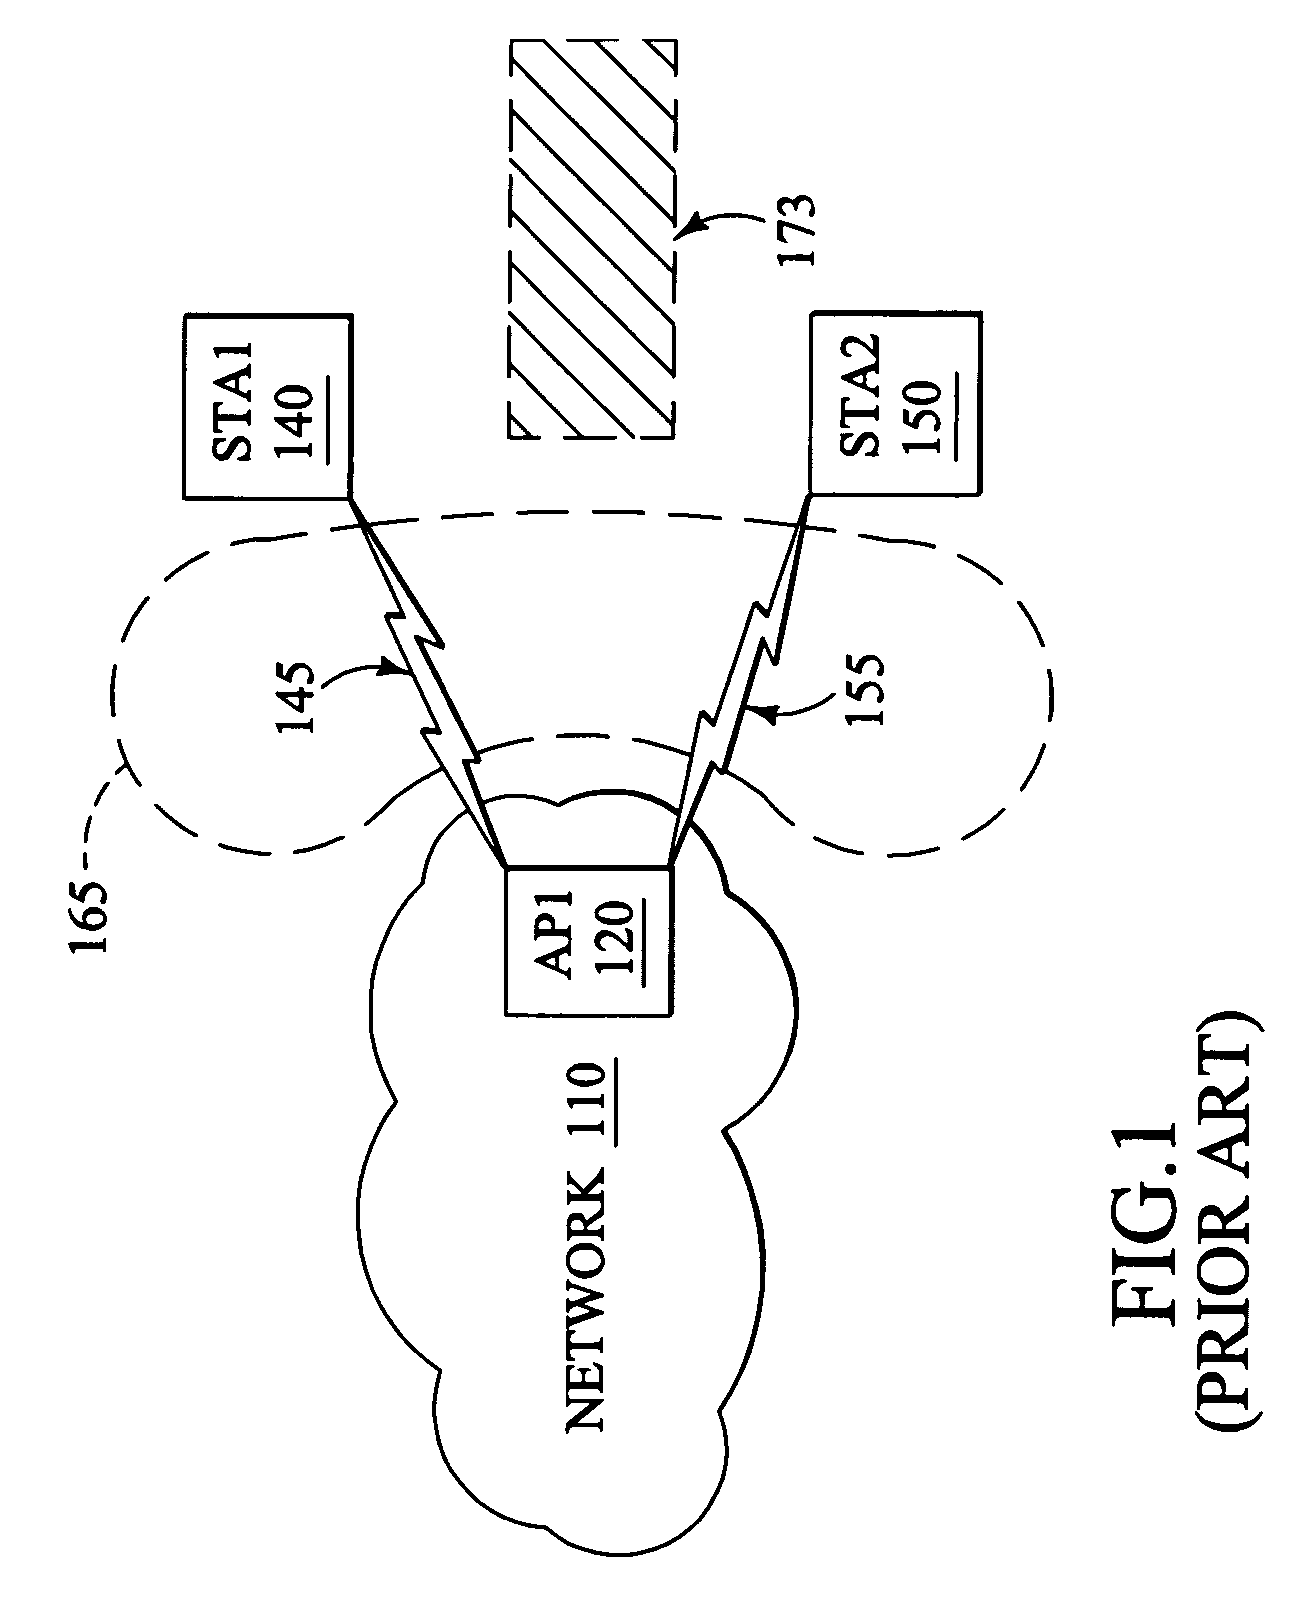 Devices, softwares and methods for rescheduling multi-party sessions upon premature termination of session